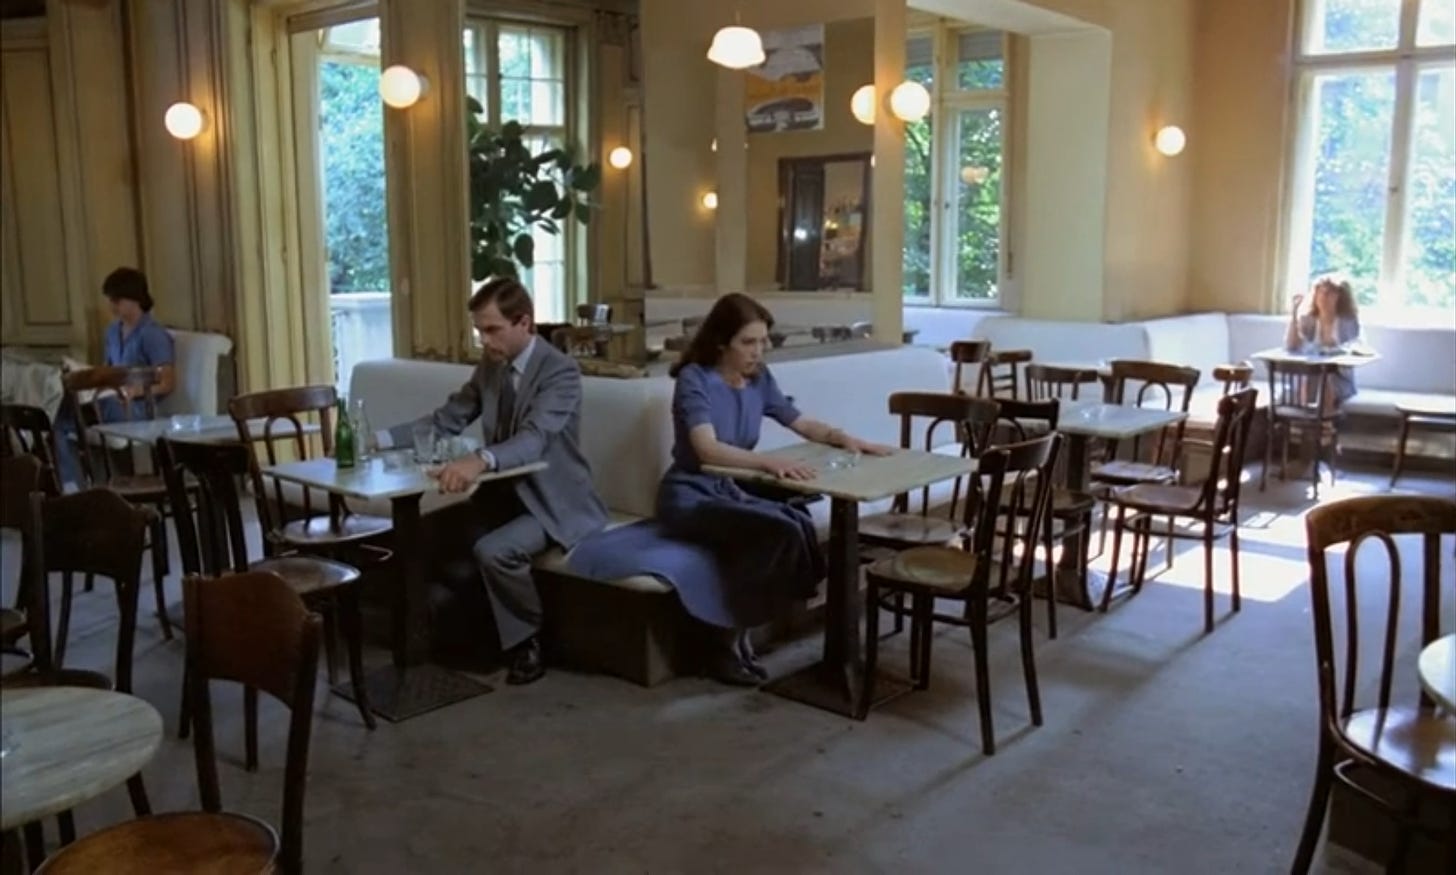 Mark (Neill) and Anna (Adjani) are so estranged they can’t even share a table…